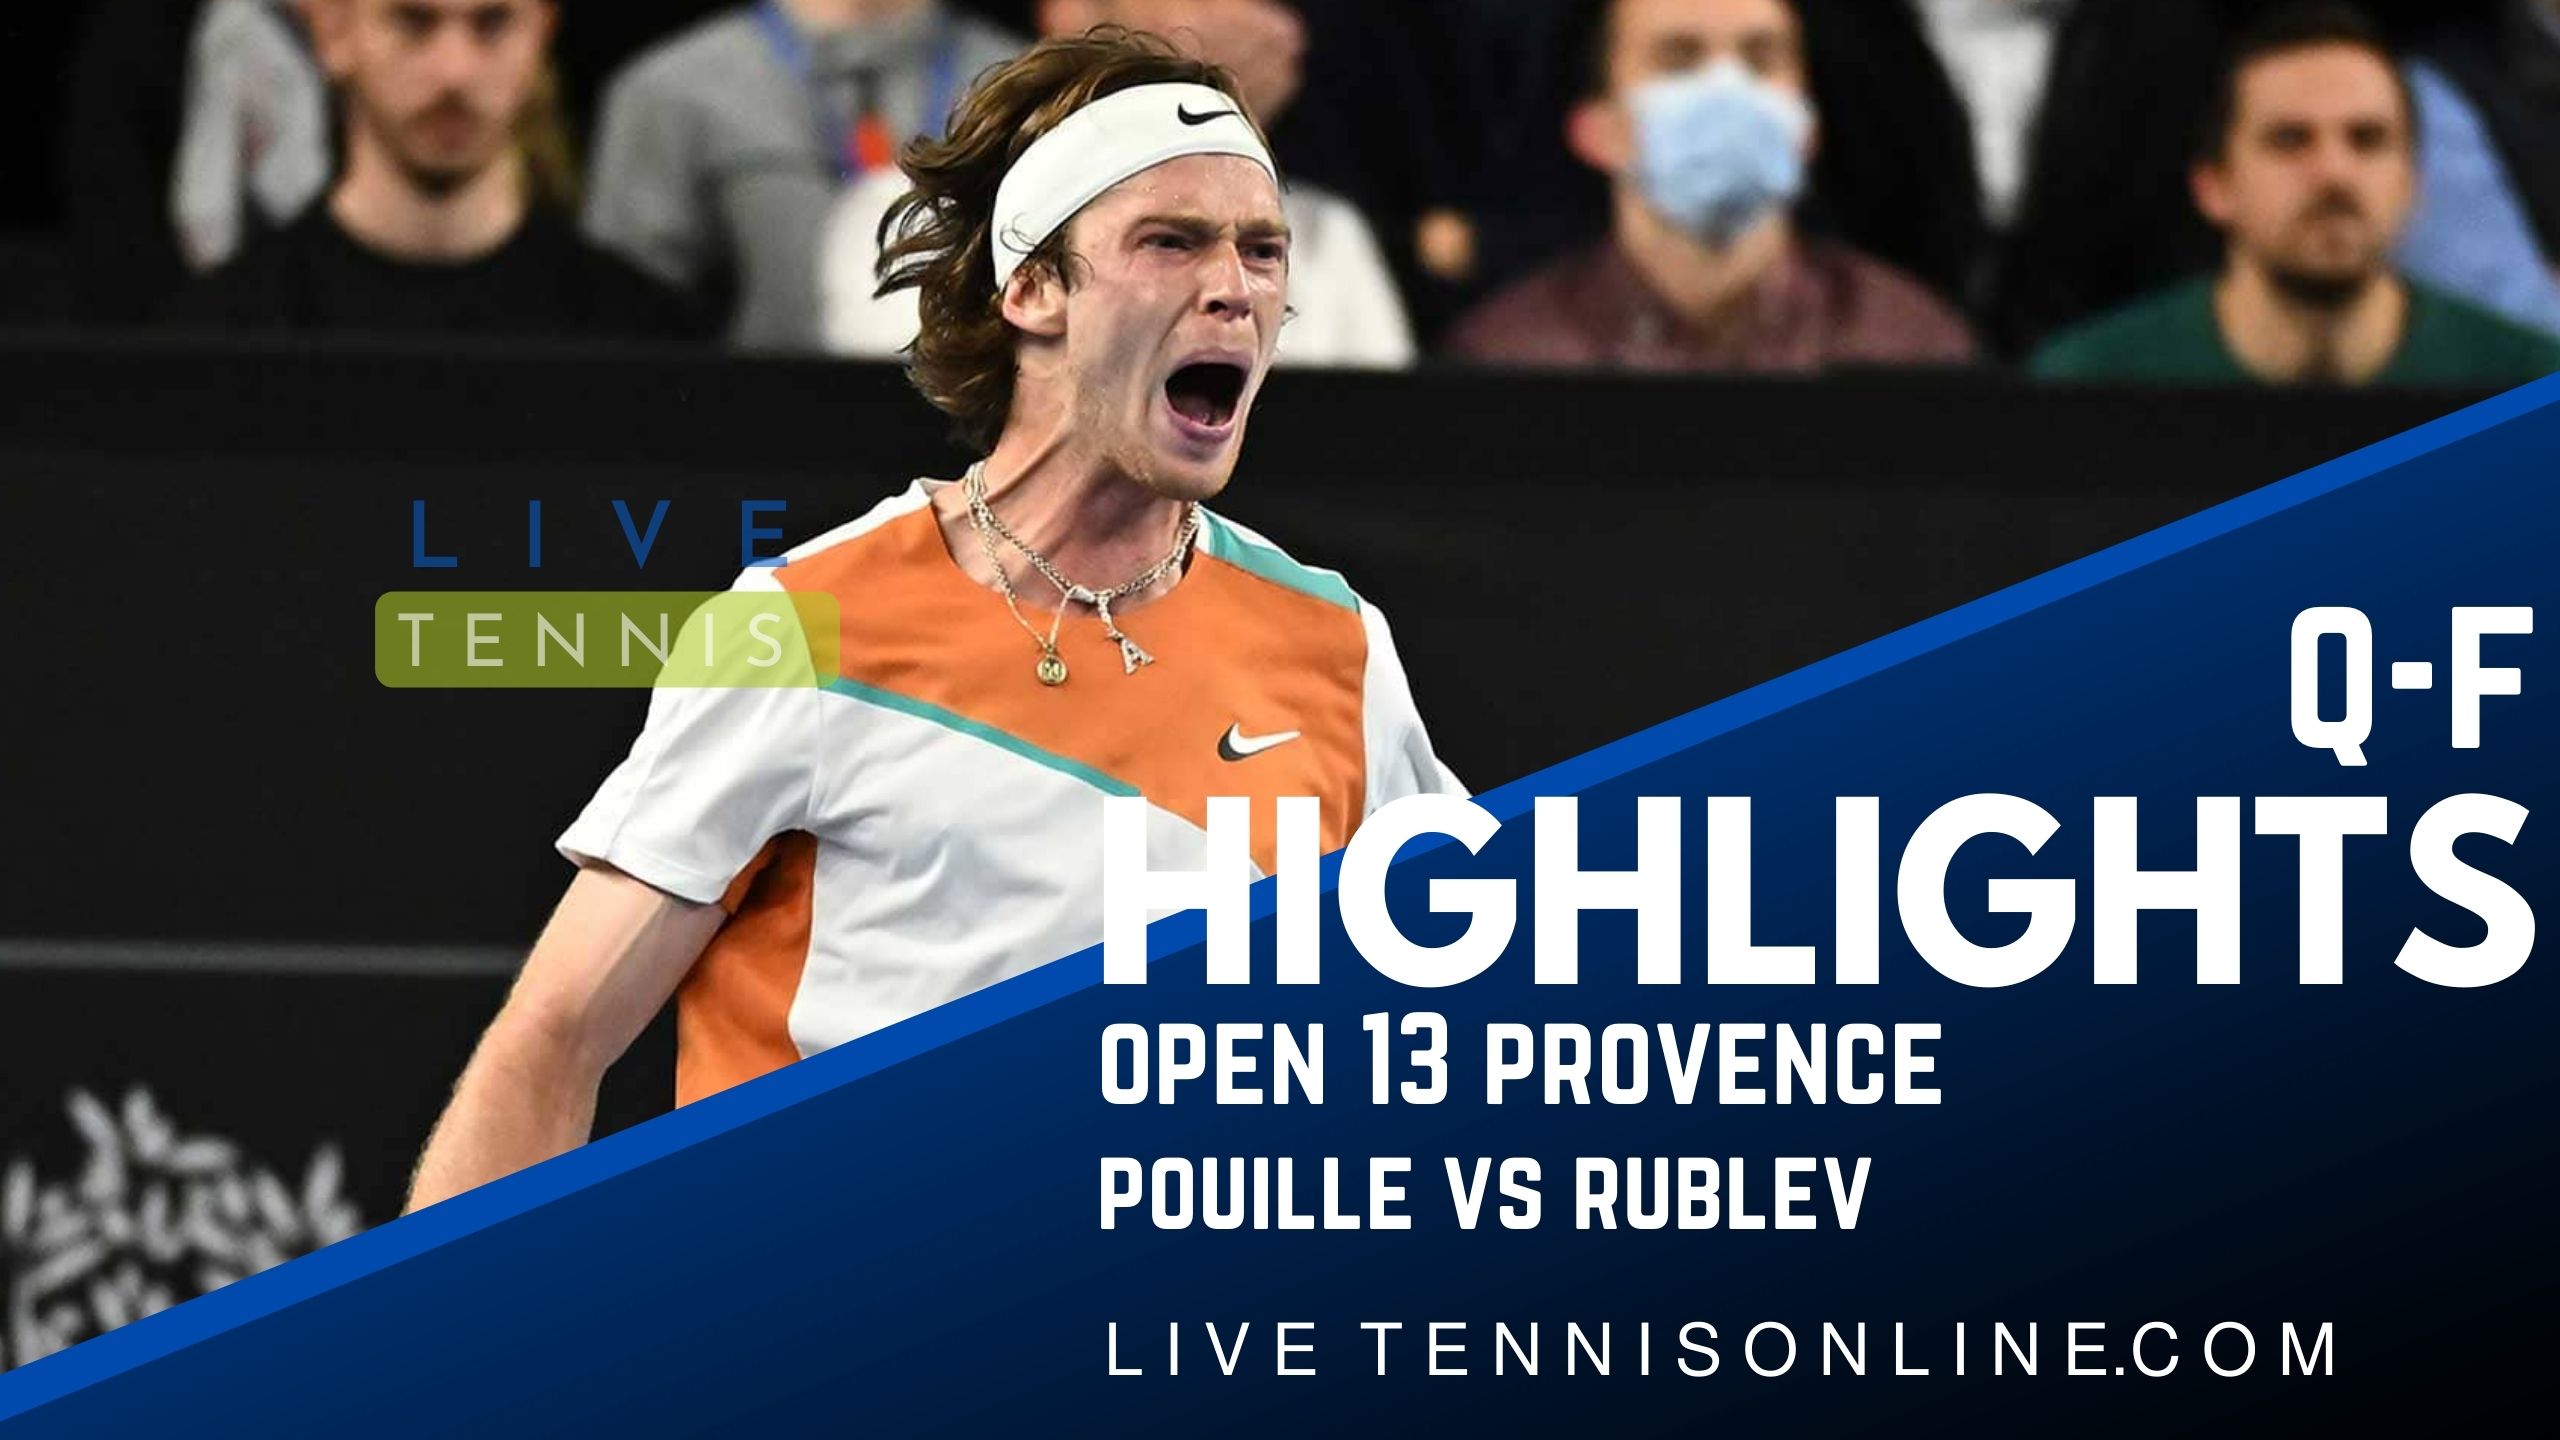 Pouille Vs Rublev QF Highlights 2022 Open 13 Provence